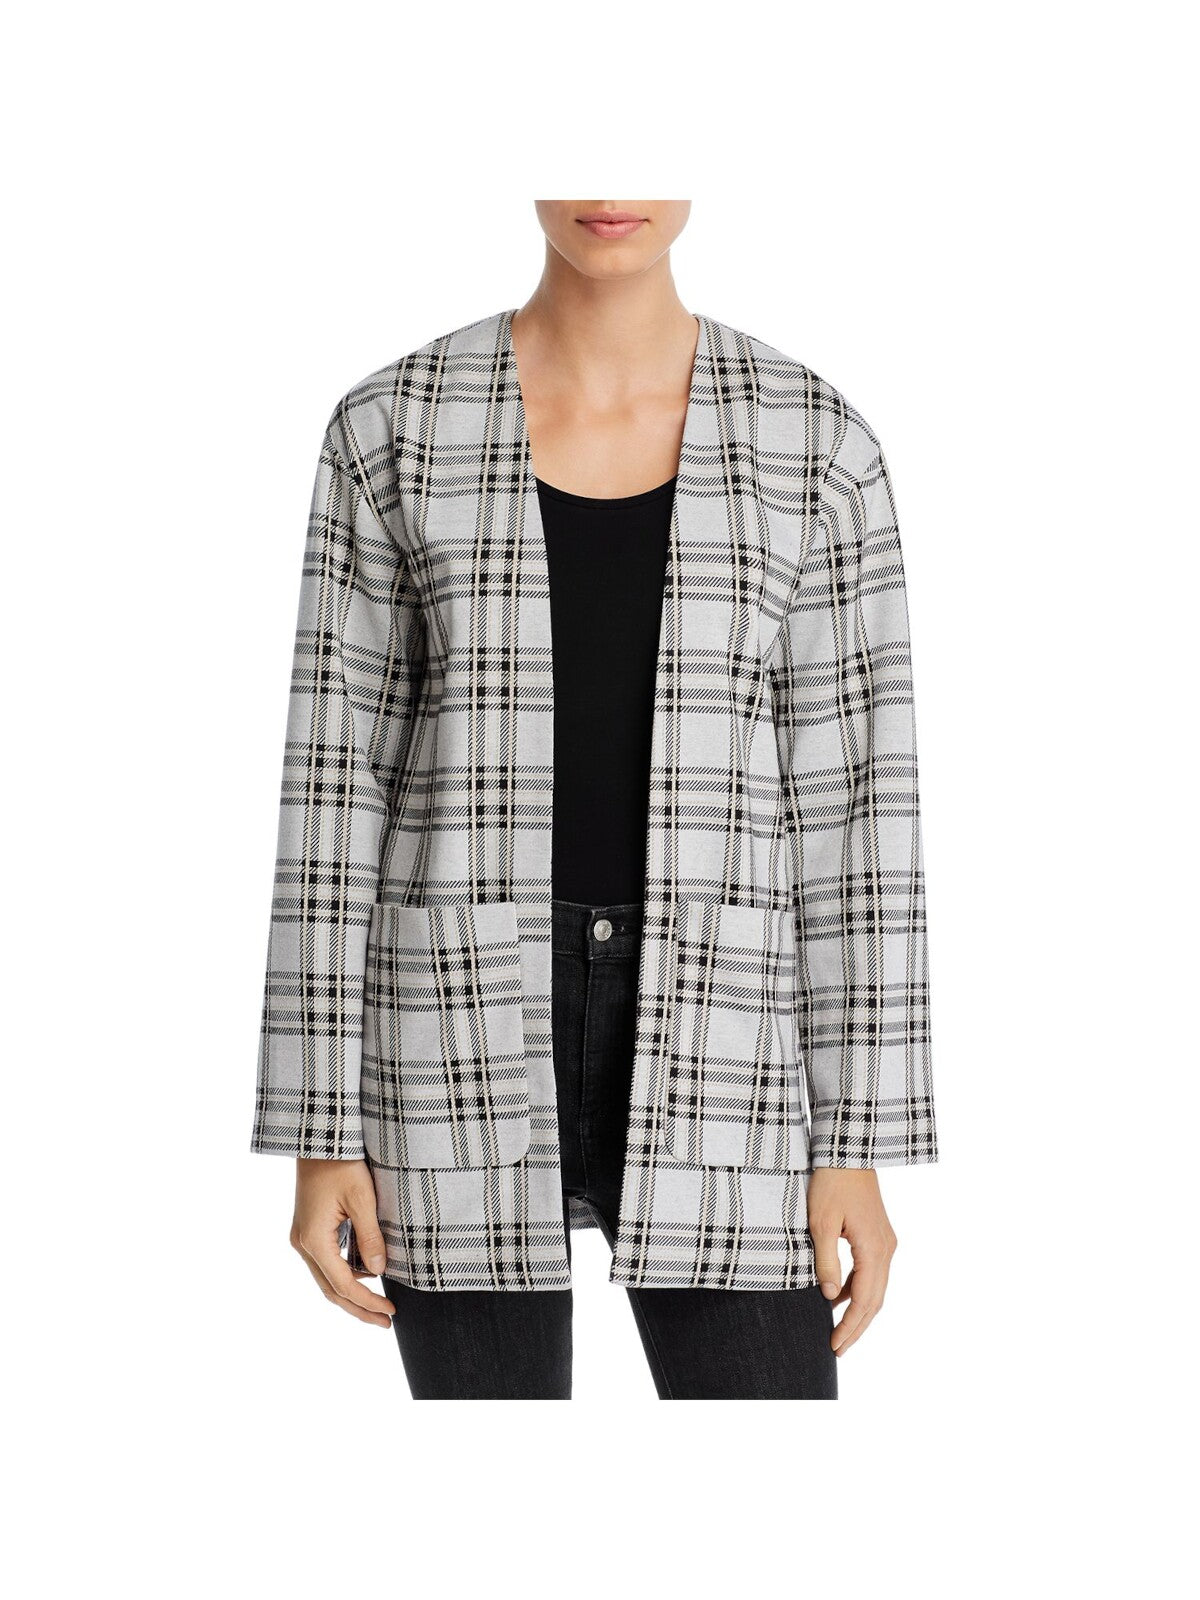 BAGATELLE Womens Gray Pocketed Open Front Cardigan Plaid Long Sleeve Wear To Work Jacket S